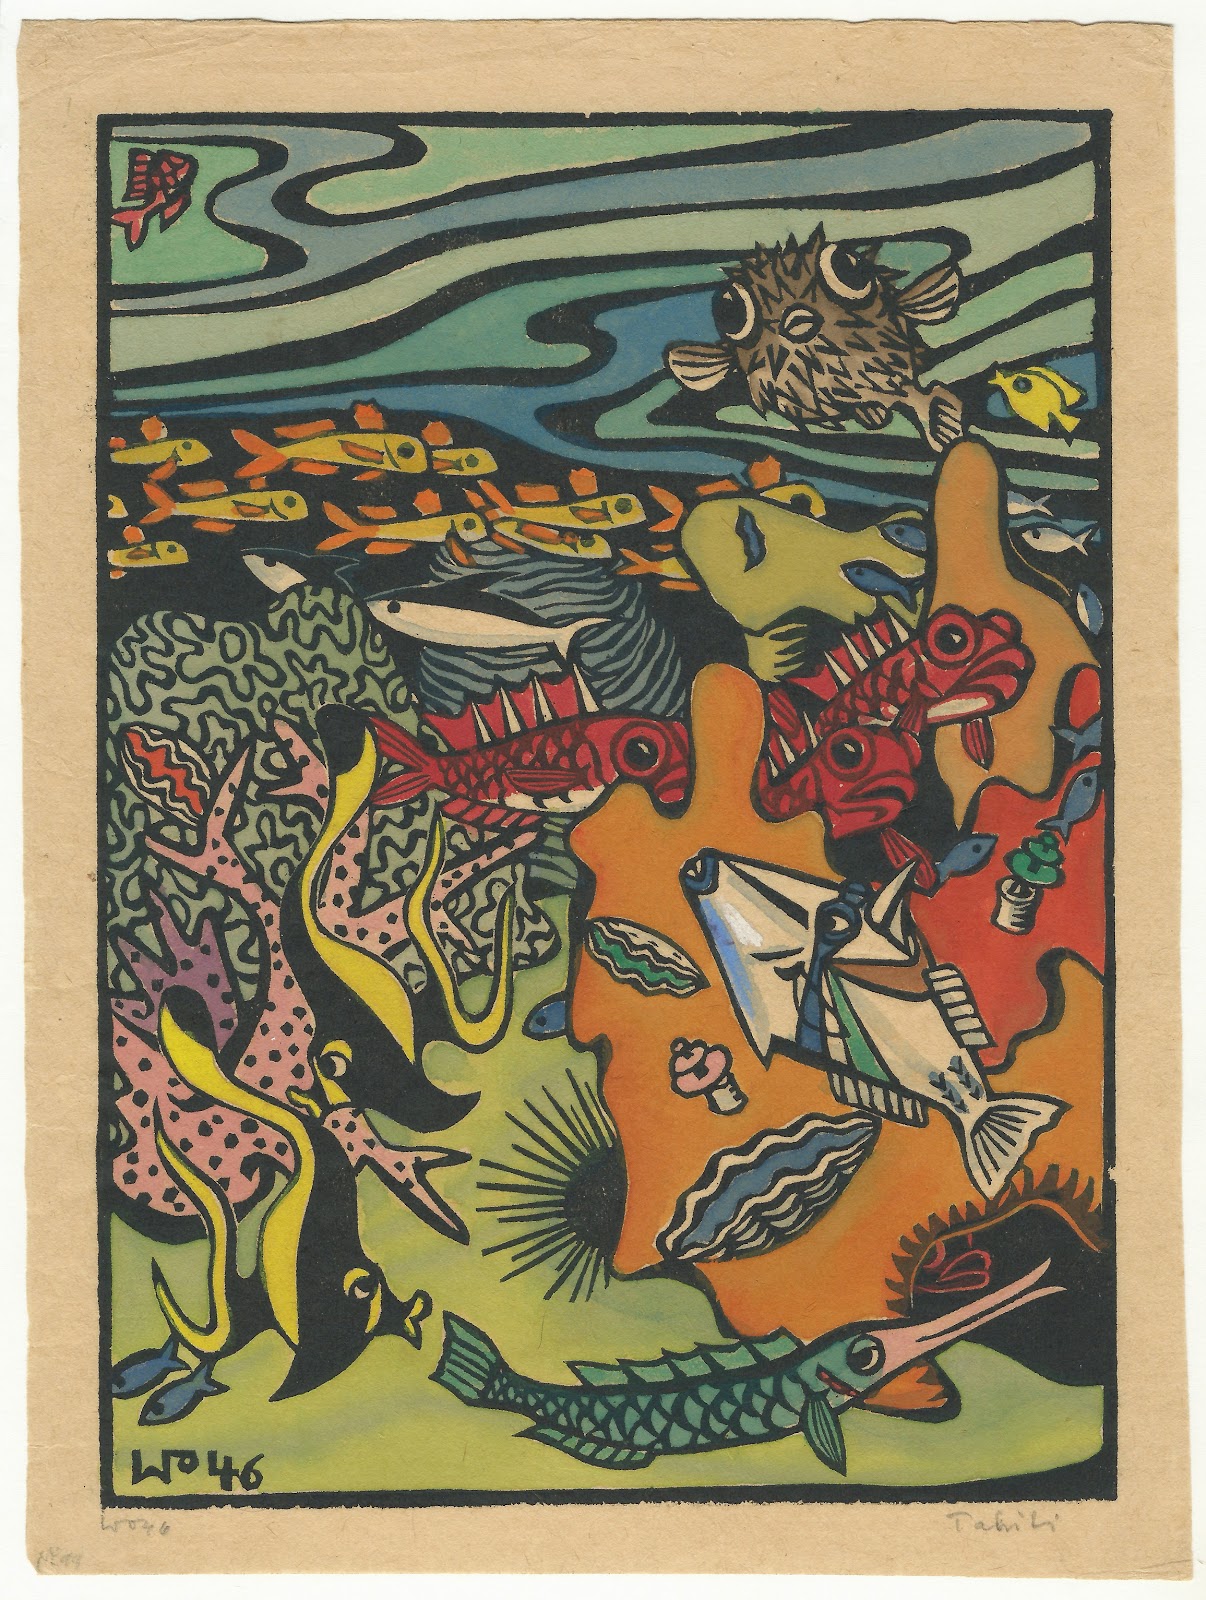 The reef, hand colored block print, 1946, family-owned